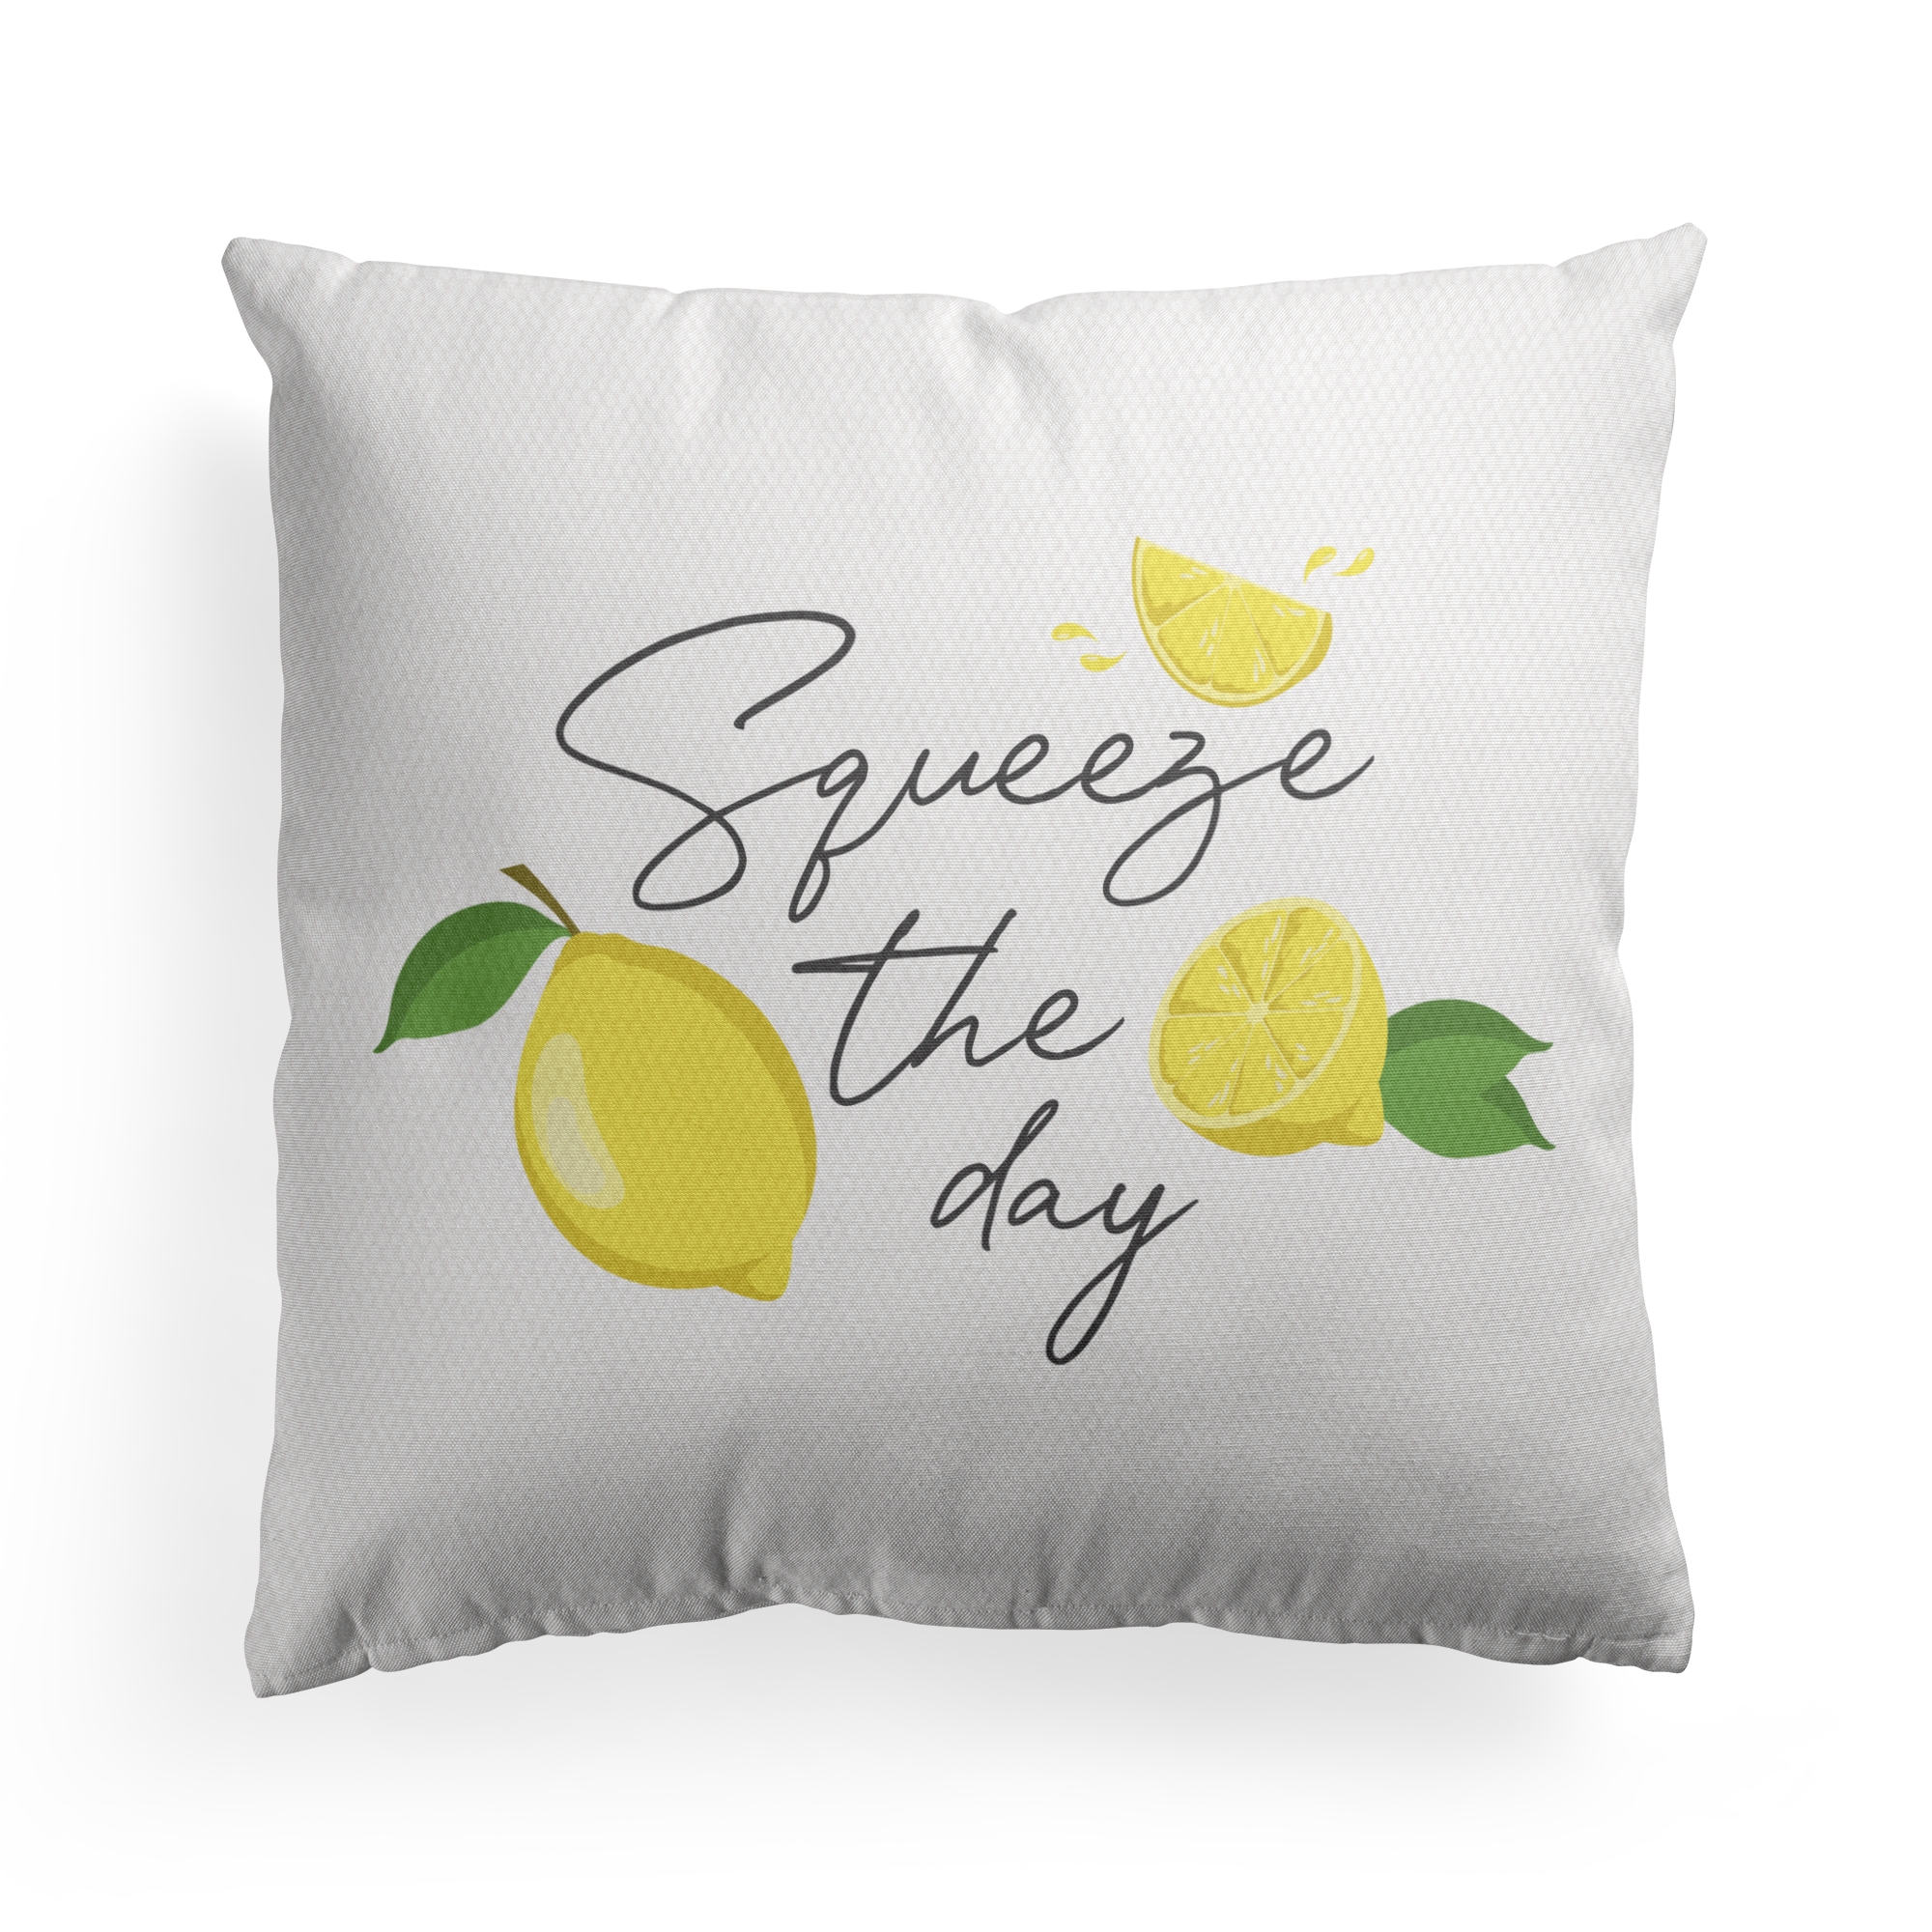 Squeeze-The-Day-Pillow-Mockup.png